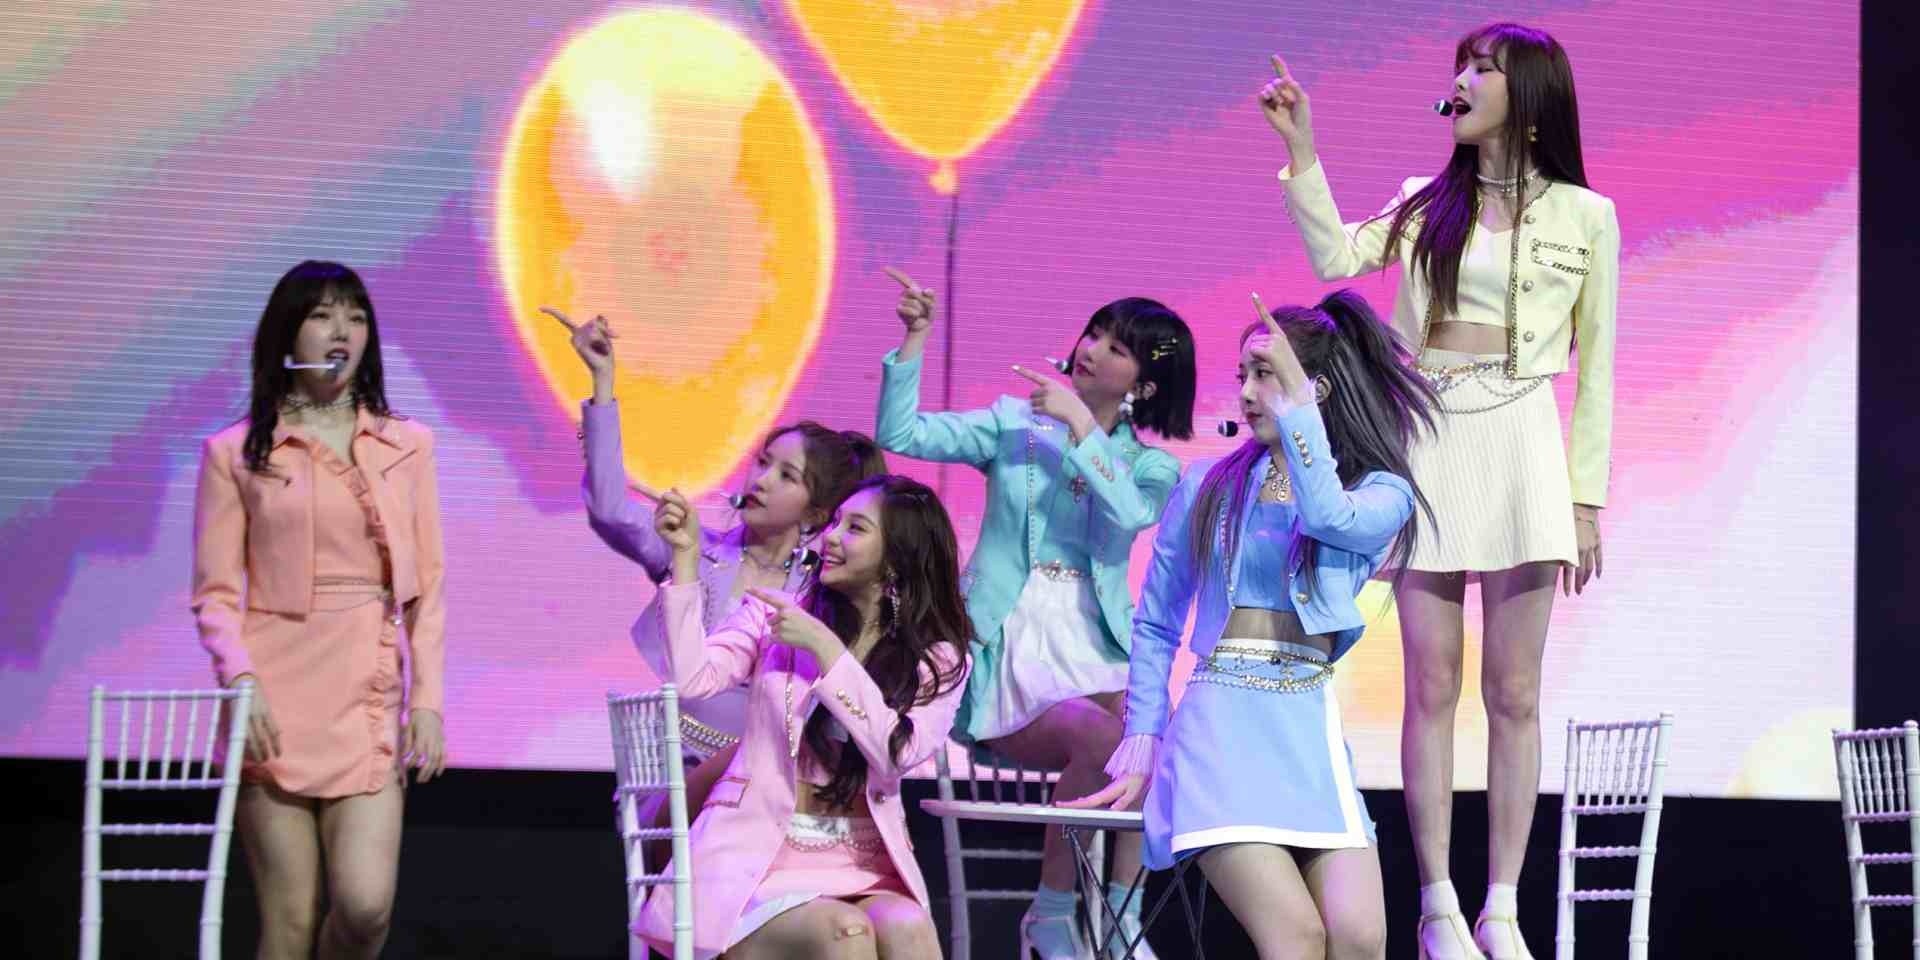 GFriend shows why they are one of the top girl groups in K-pop at Singapore show – gig report